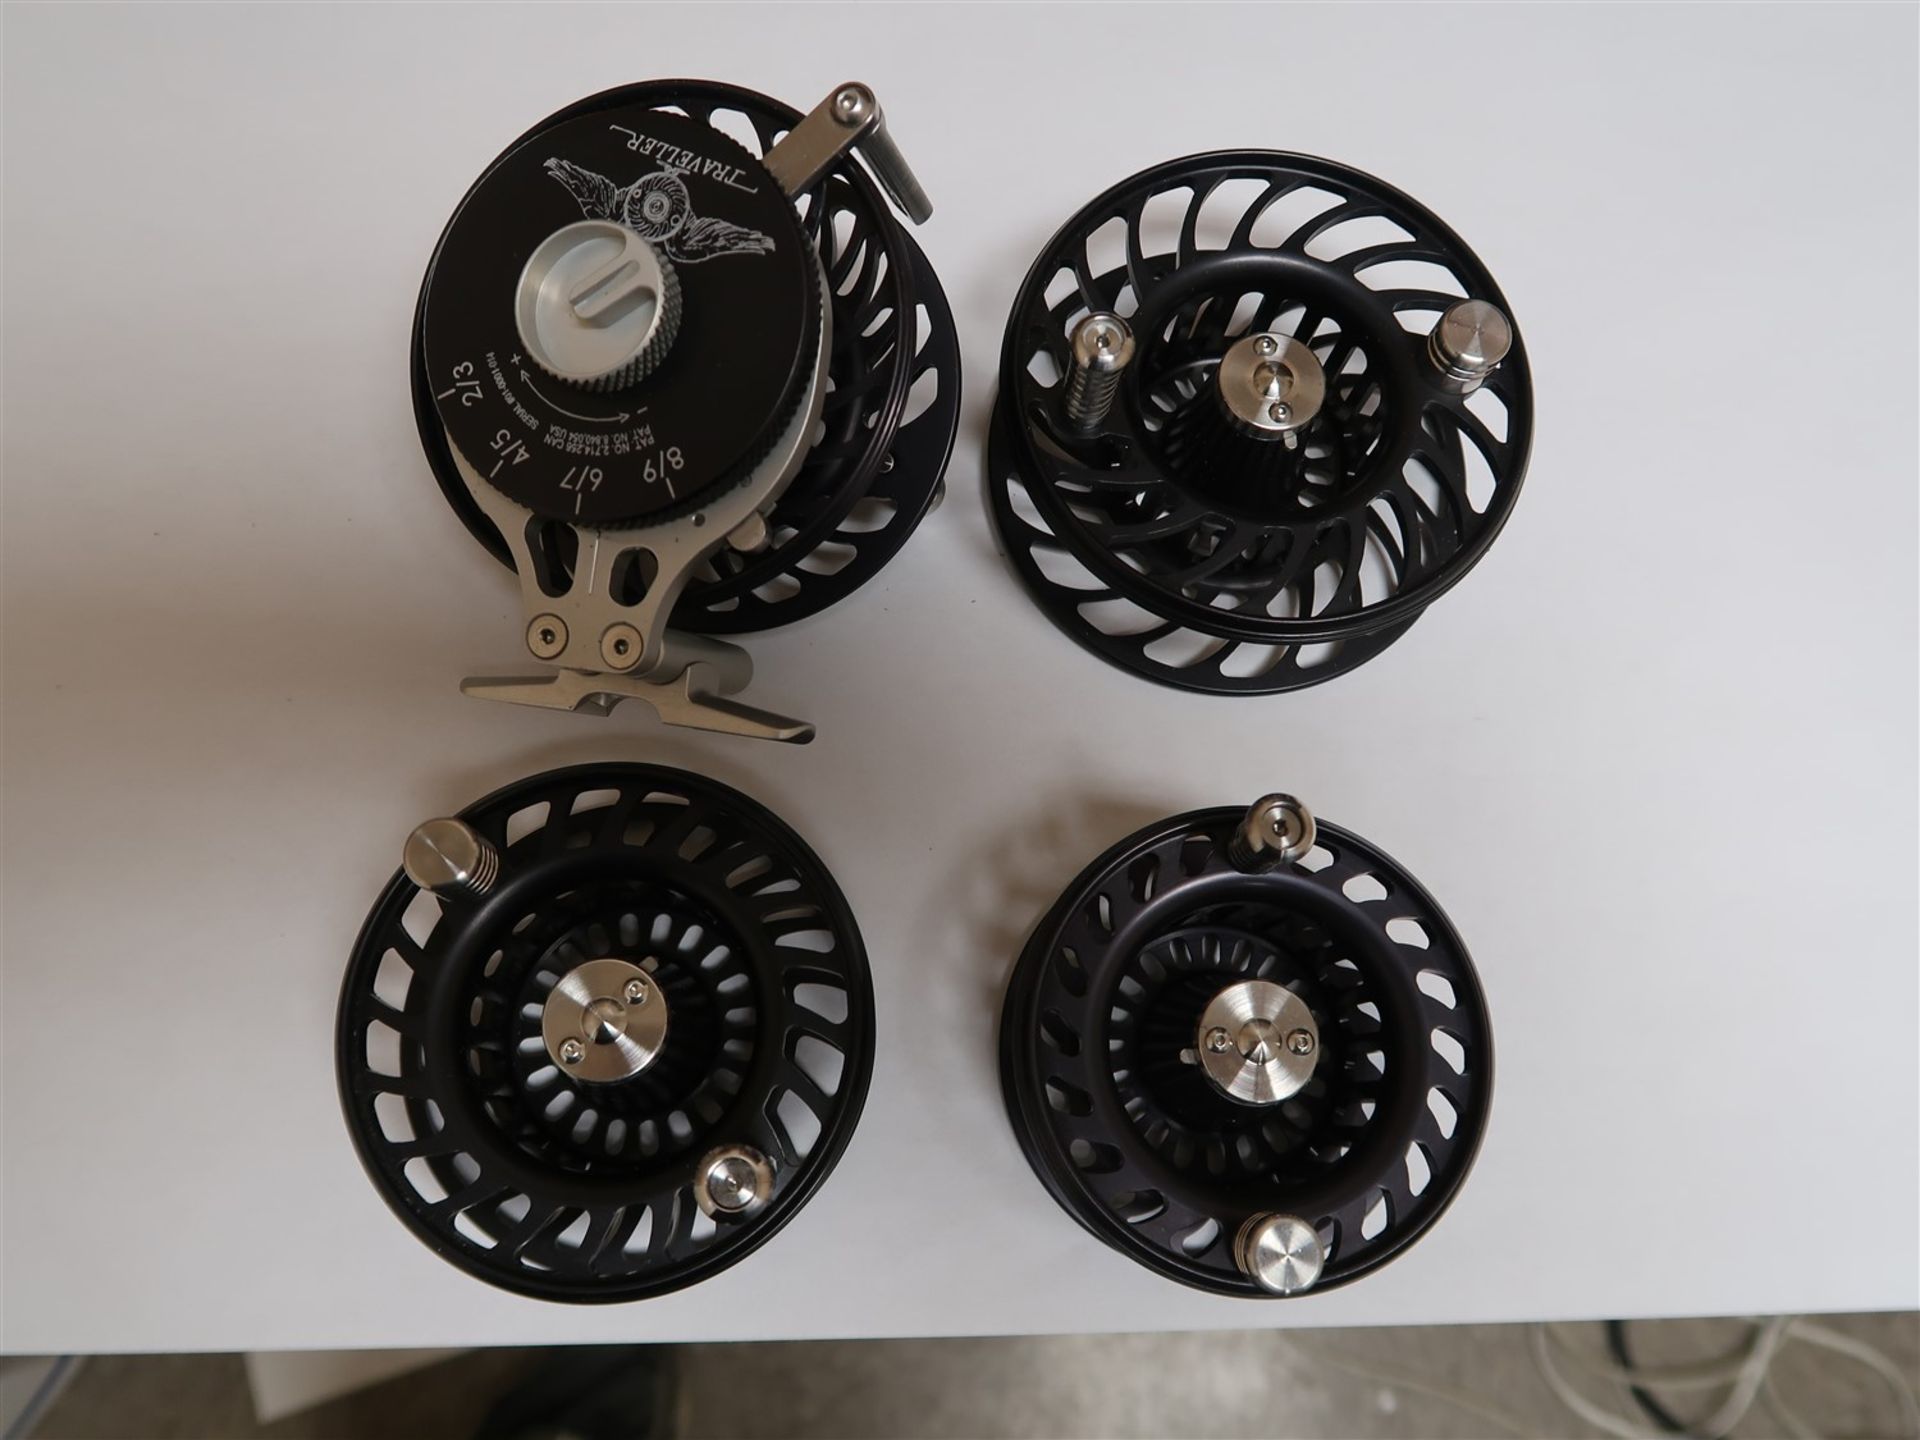 The Traveller Set of 4 interchangeable adjustable spool size Fly Fishing Reels (Black Satin - Image 6 of 6